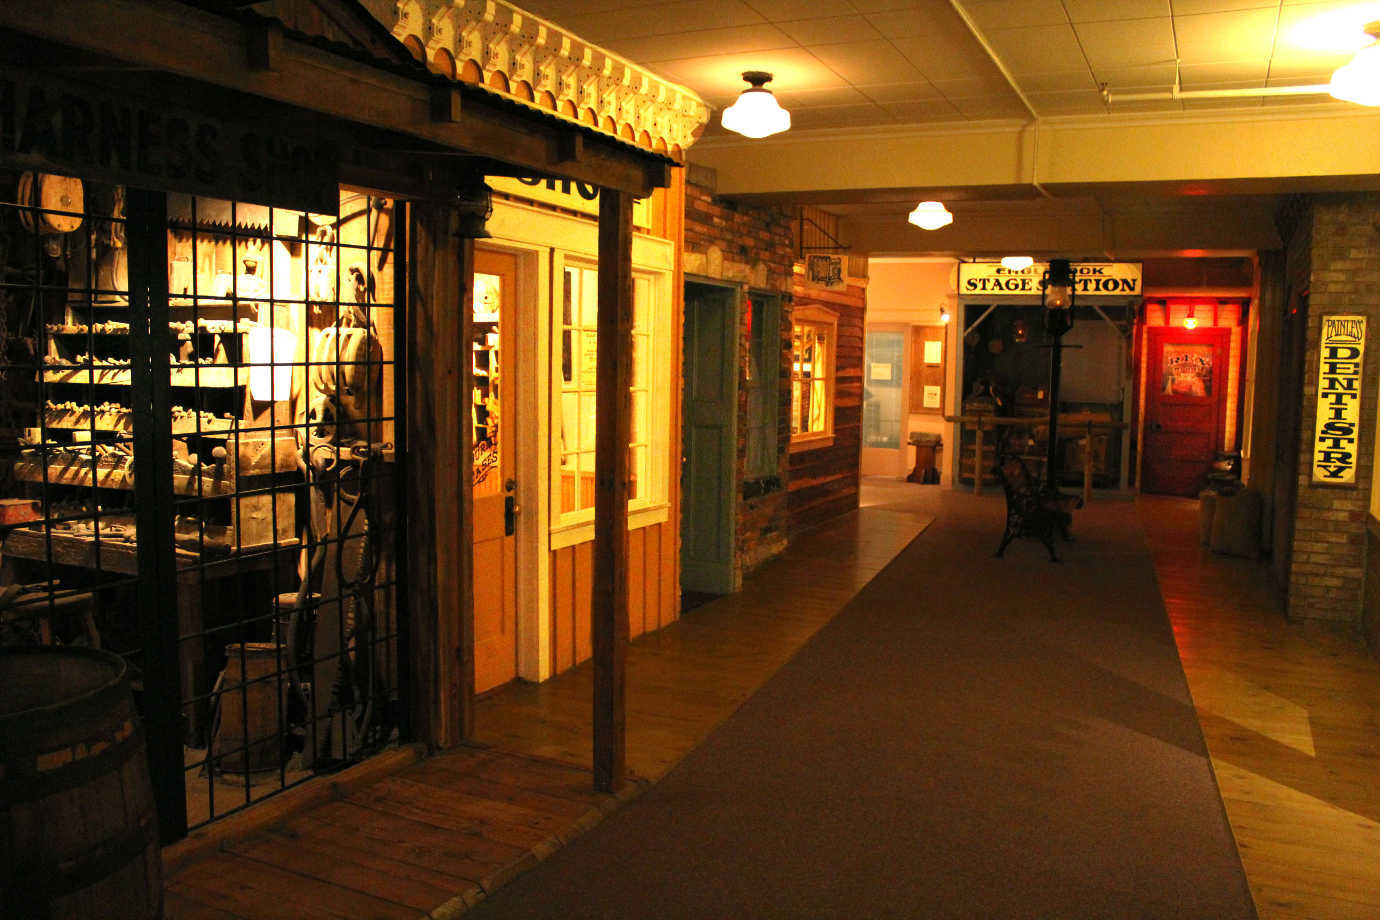 The larger space will allow the Museum of Idaho to expand its permanent exhibition from the current *Eagle Rock, U.S.A.*, pictured here, to a more comprehensive exhibition interpreting the region from the Ice Age to the present day. Image courtesy of the Museum of Idaho.